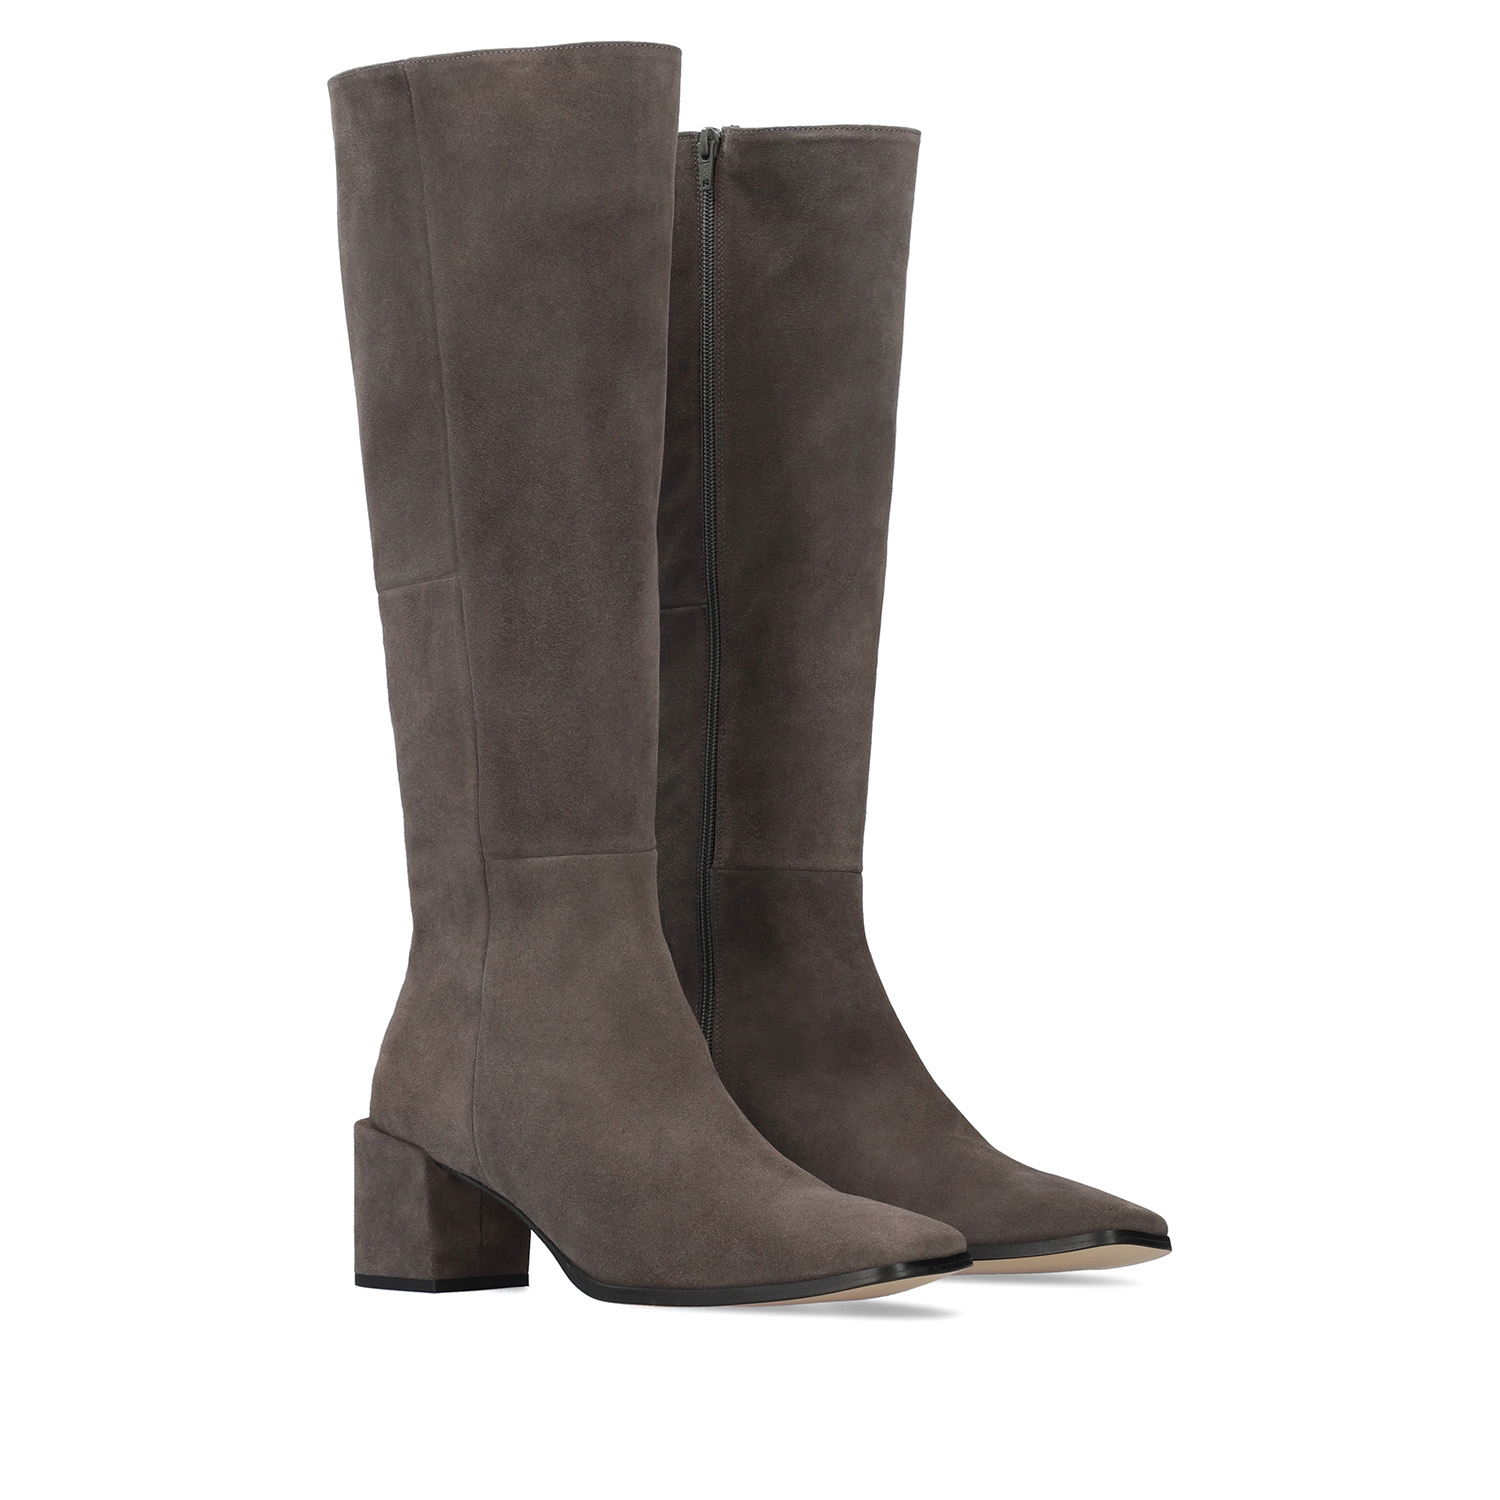 Knee-high grey split leather boots 